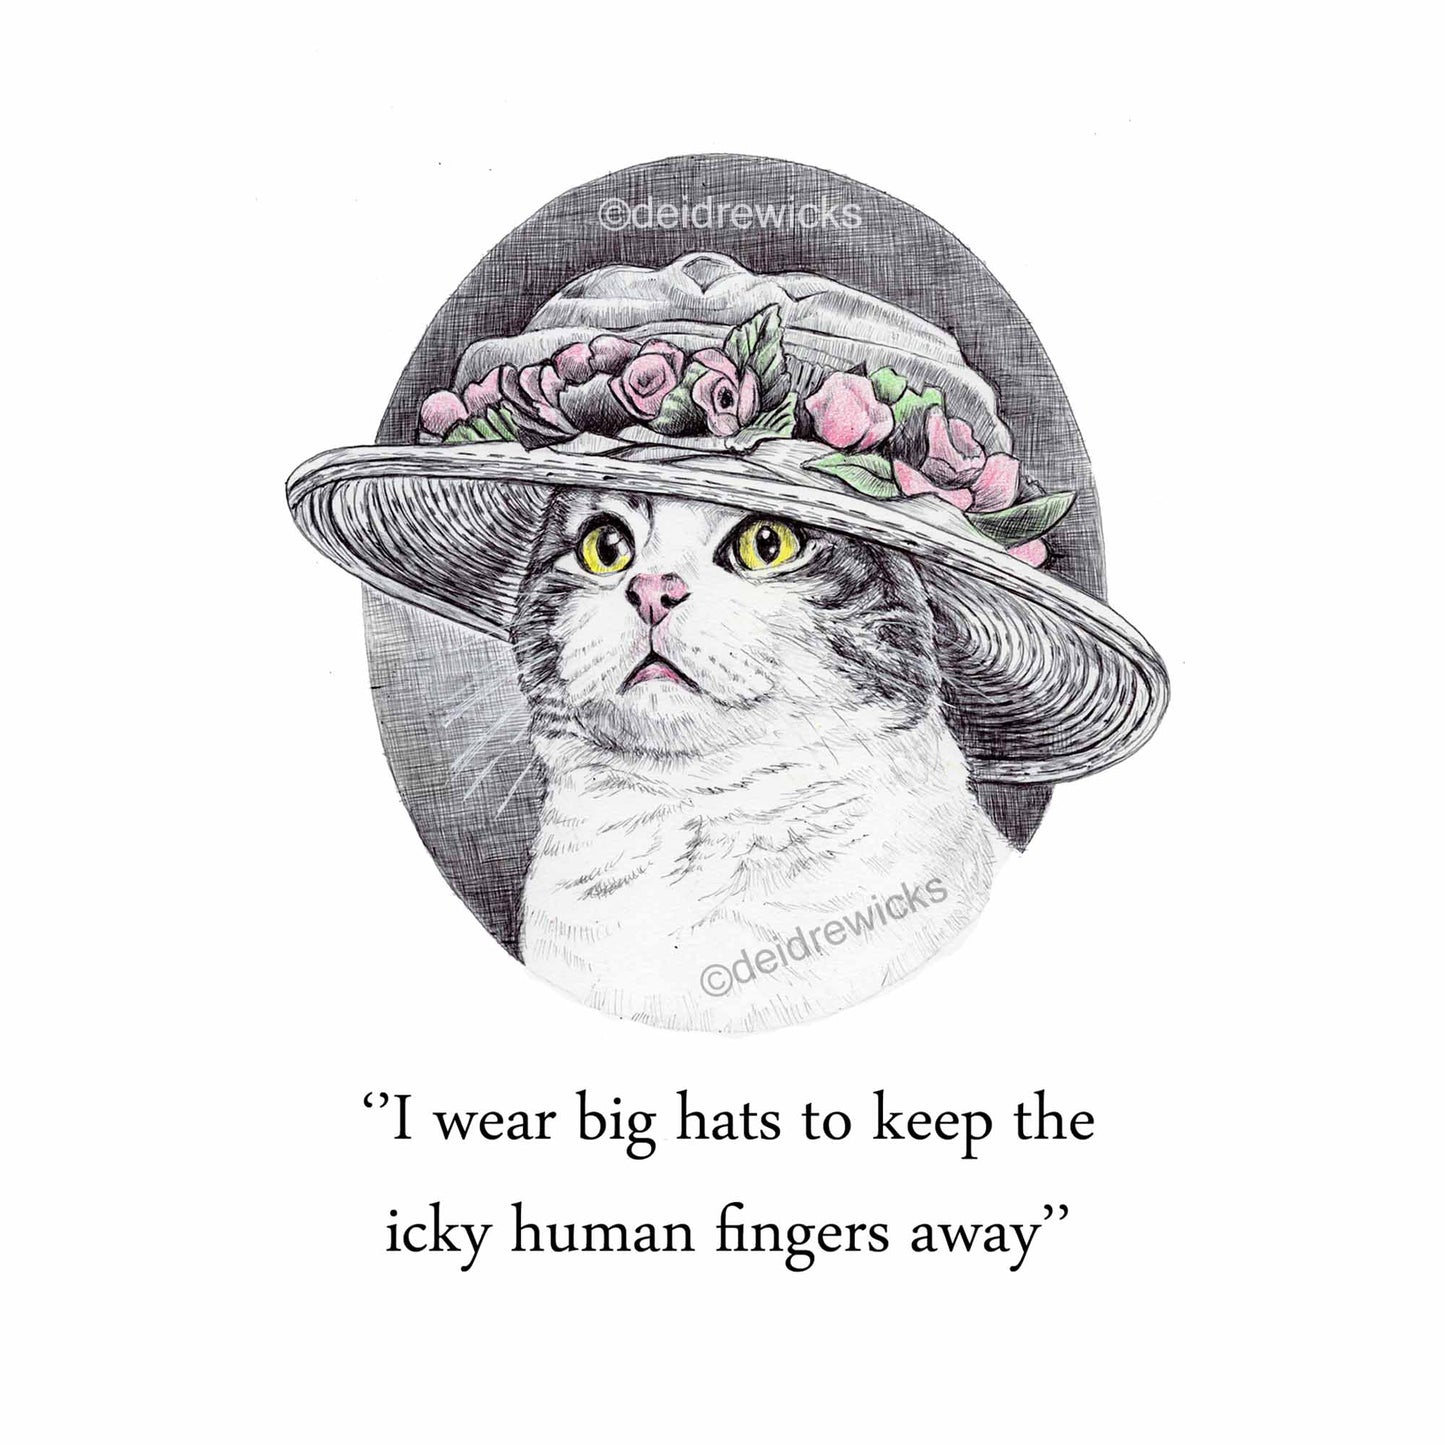 Big Hat Cat Ballpoint Pen Illustration of a Tabby Cat Wearing a Large  Gilded Age Hat by Deidre Wicks